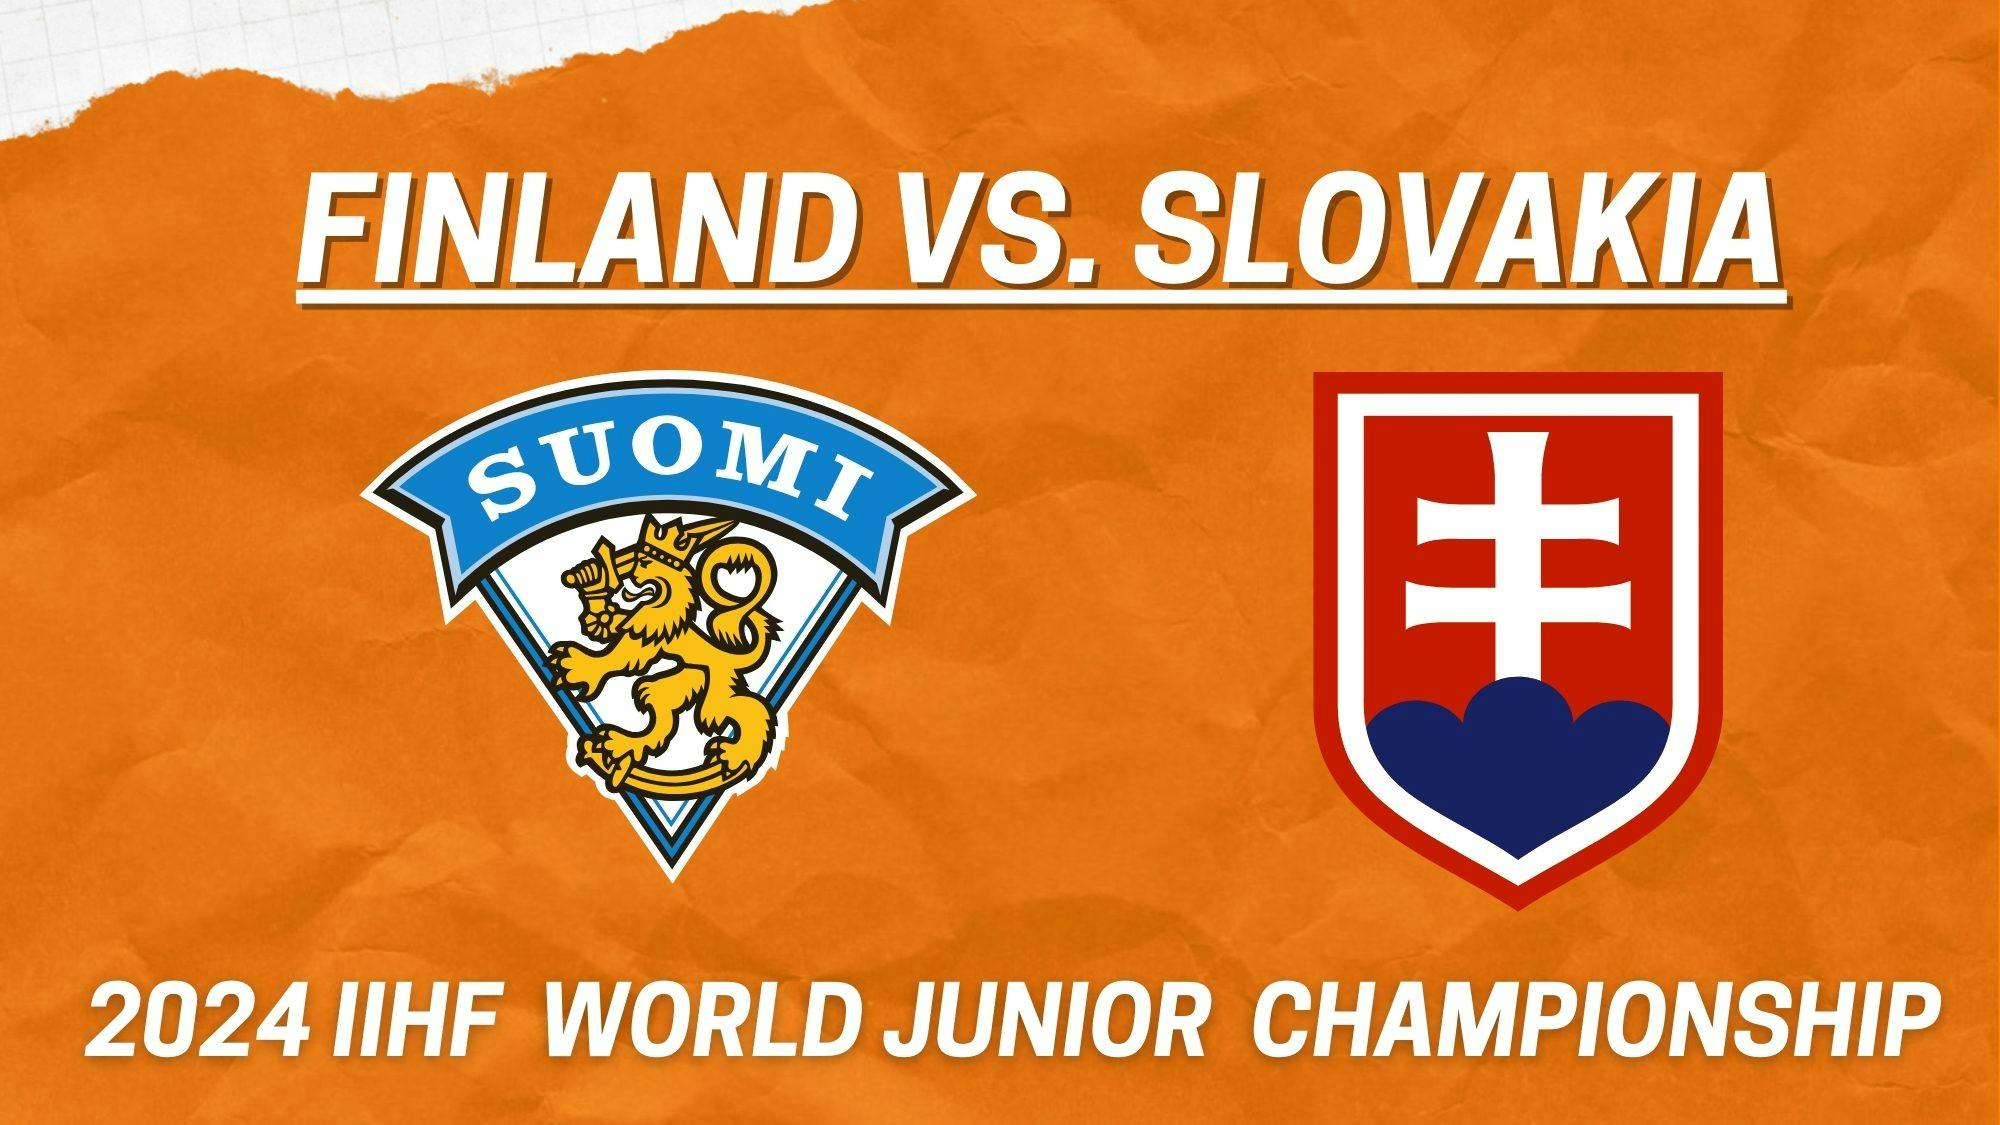 Top standouts from Finland vs. Slovakia in quarterfinal World Junior Championship game